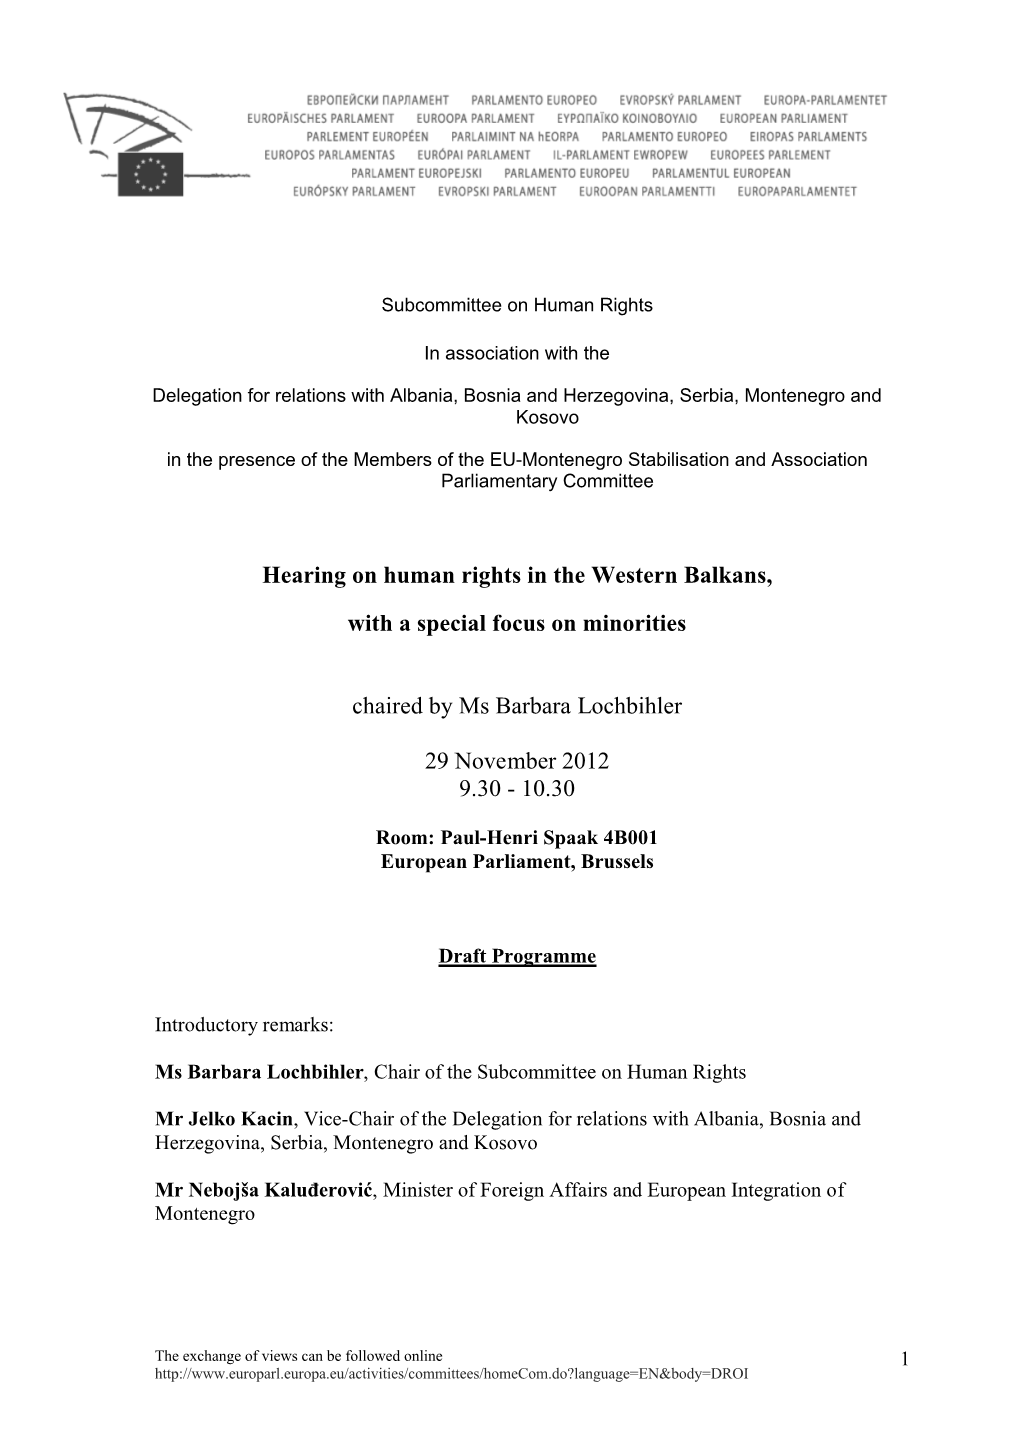 Human Rights in the Western Balkans, with a Special Focus On